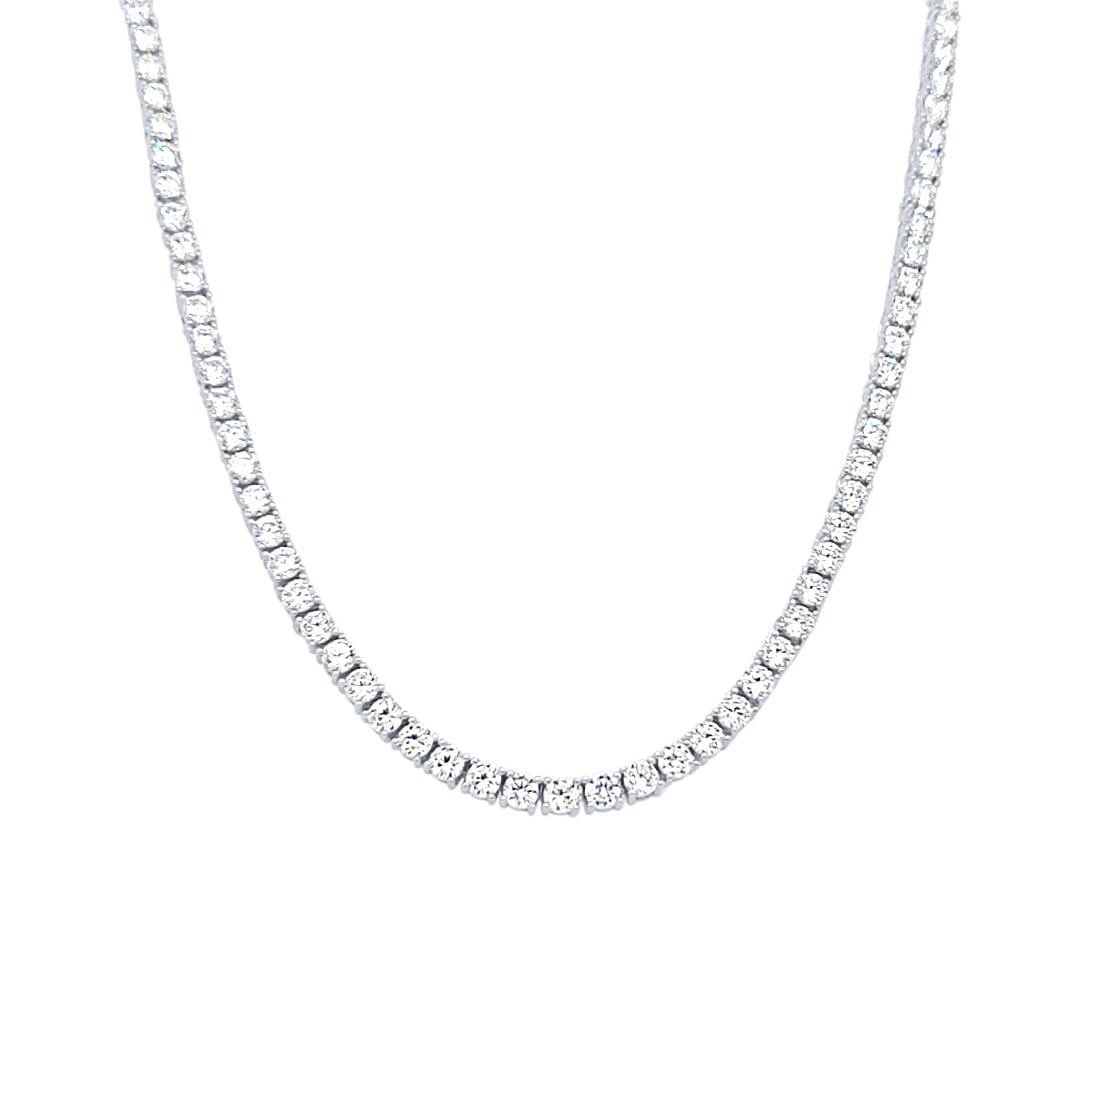 41cm Tennis Claw Necklace with Cubic Zirconia in Sterling Silver Necklaces Bevilles 